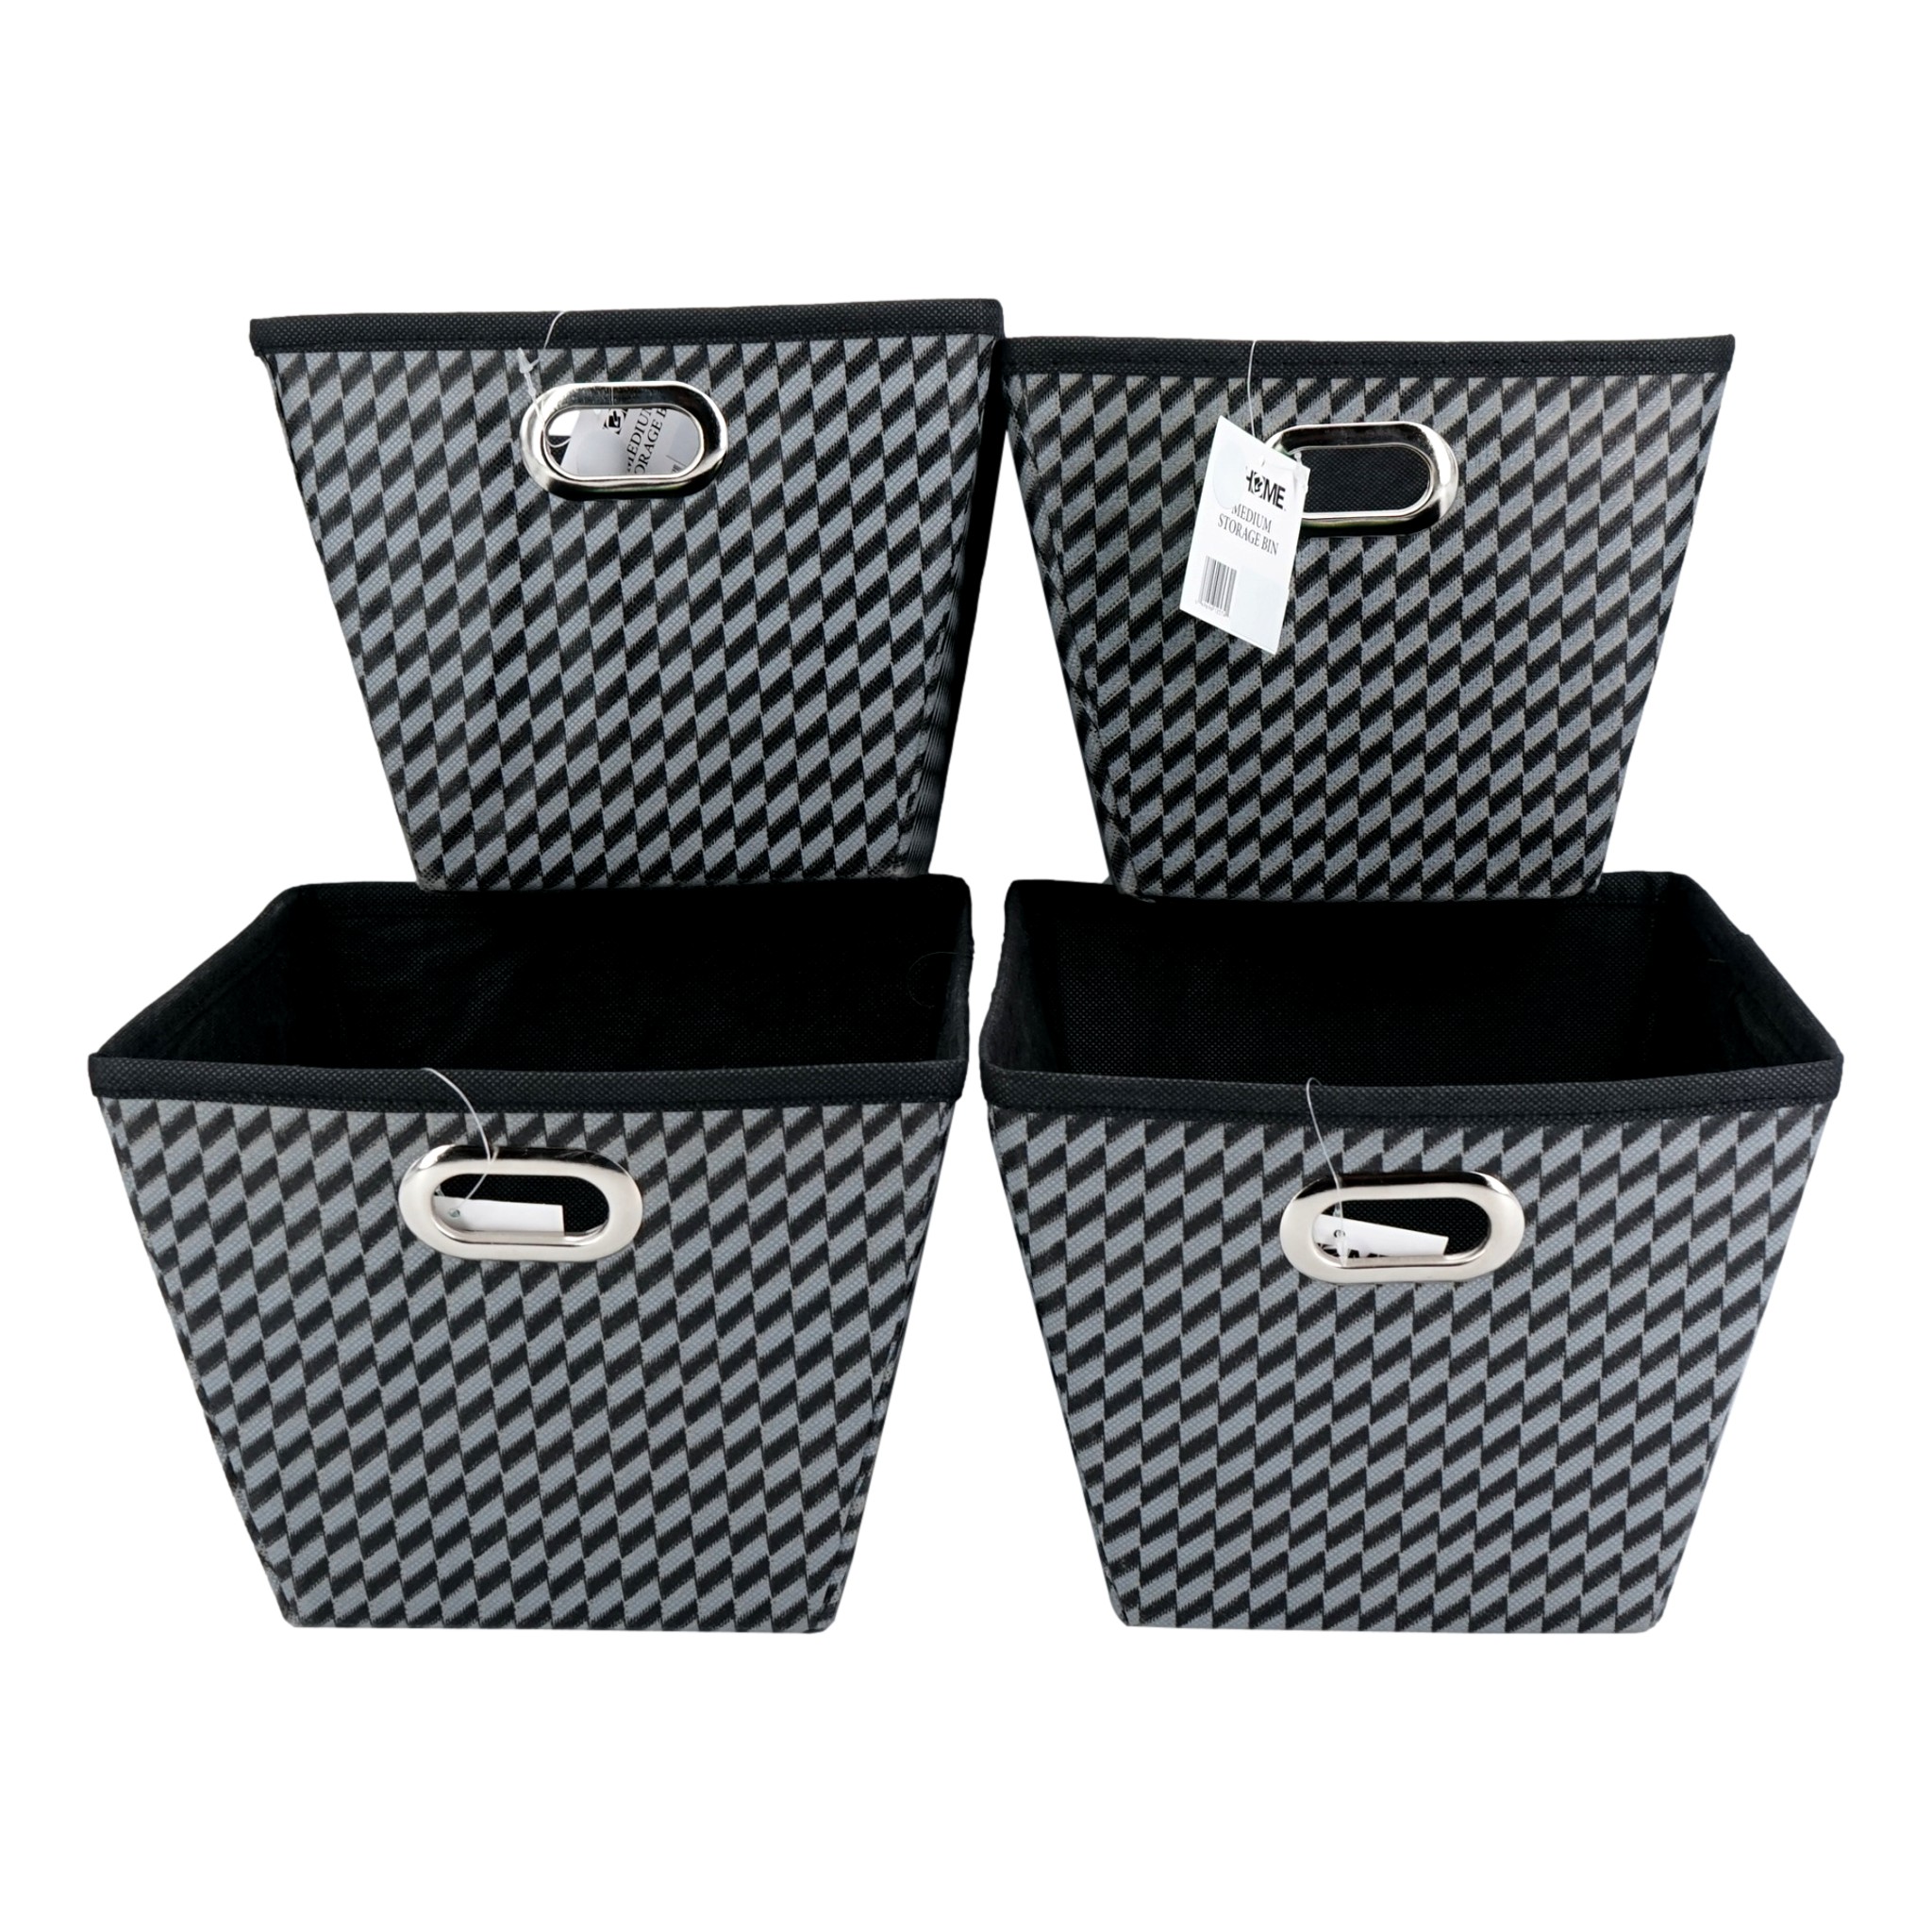 Set of 9 Woven Storage Baskets Organizer Bins with Handles for